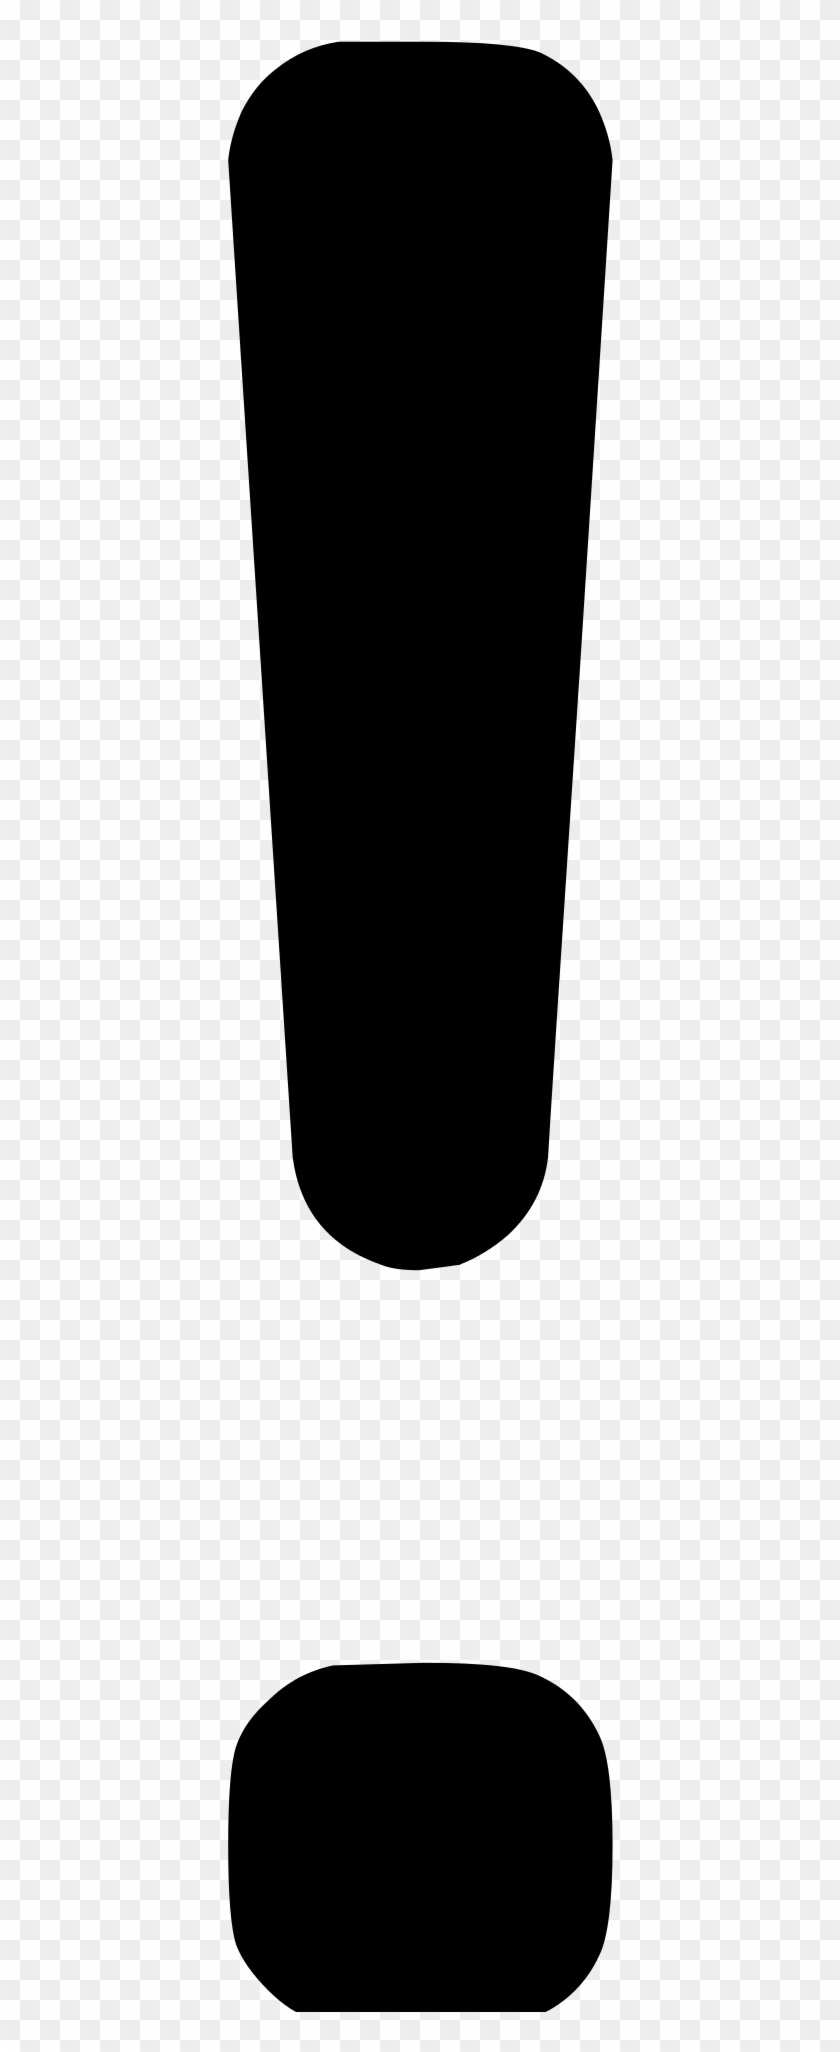 Exclamation Mark Png - Black Transparent Background Exclamation Point Clipart #295663